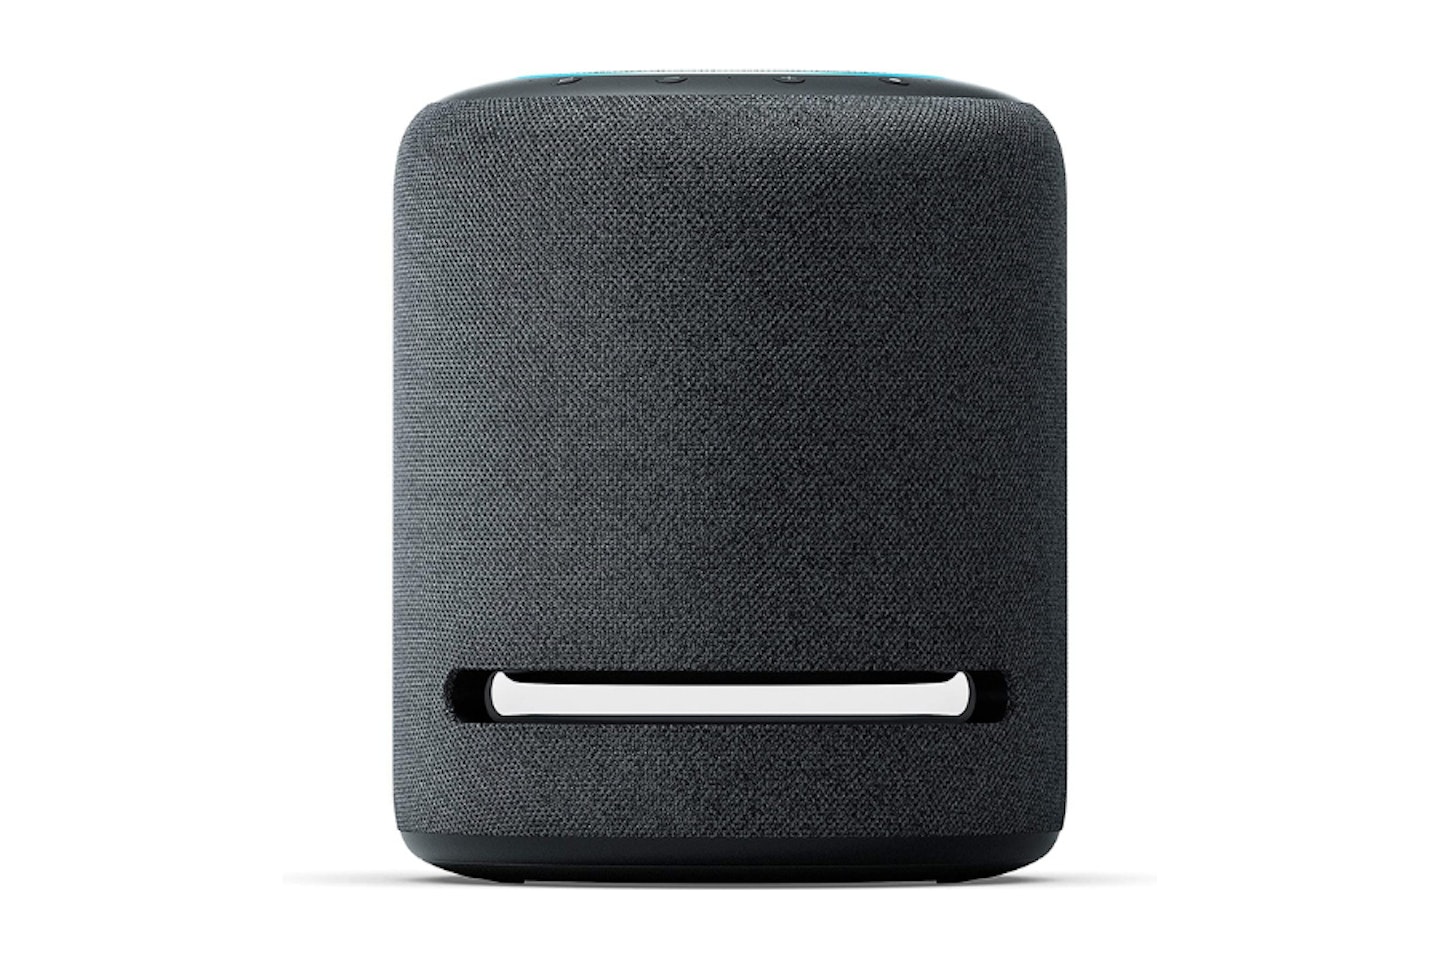 Echo Studio | Our best-sounding Wi-Fi and Bluetooth smart speaker